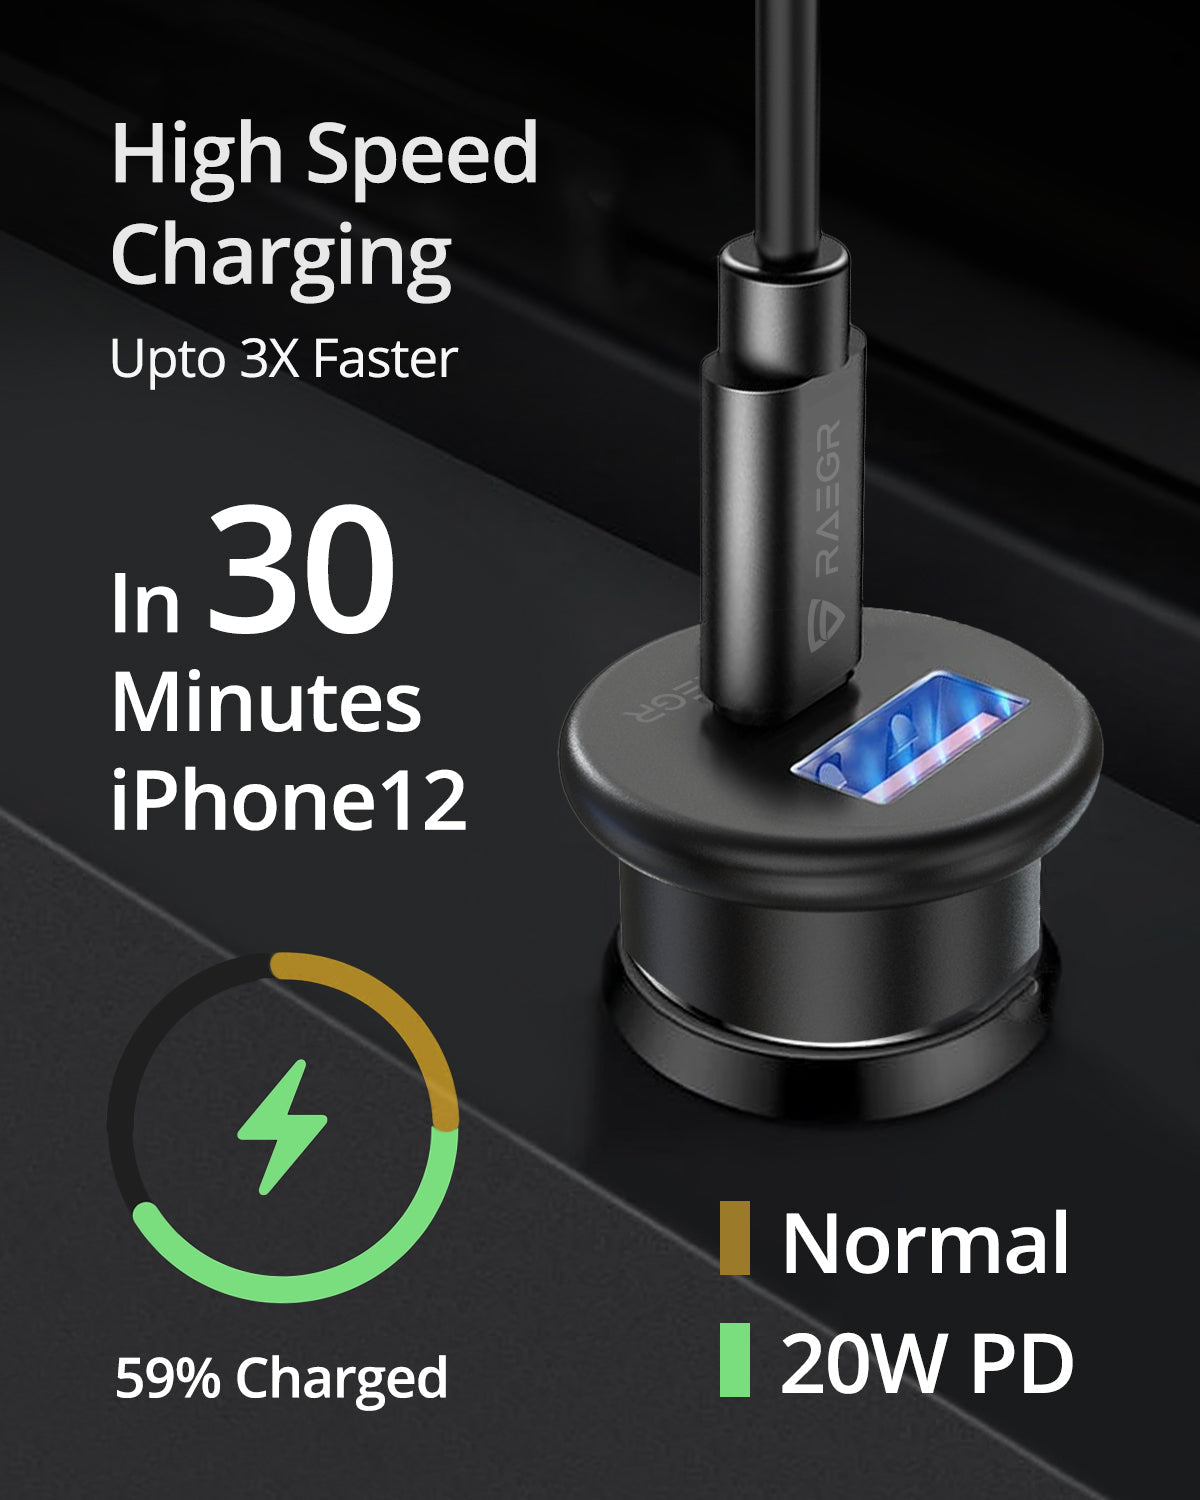 RAEGR RapidLink 400 USB+C Type Car Charger with 20W PD & 18W QC 3.0 Dual Port 3.0 Dual Port Fast Car Adapter